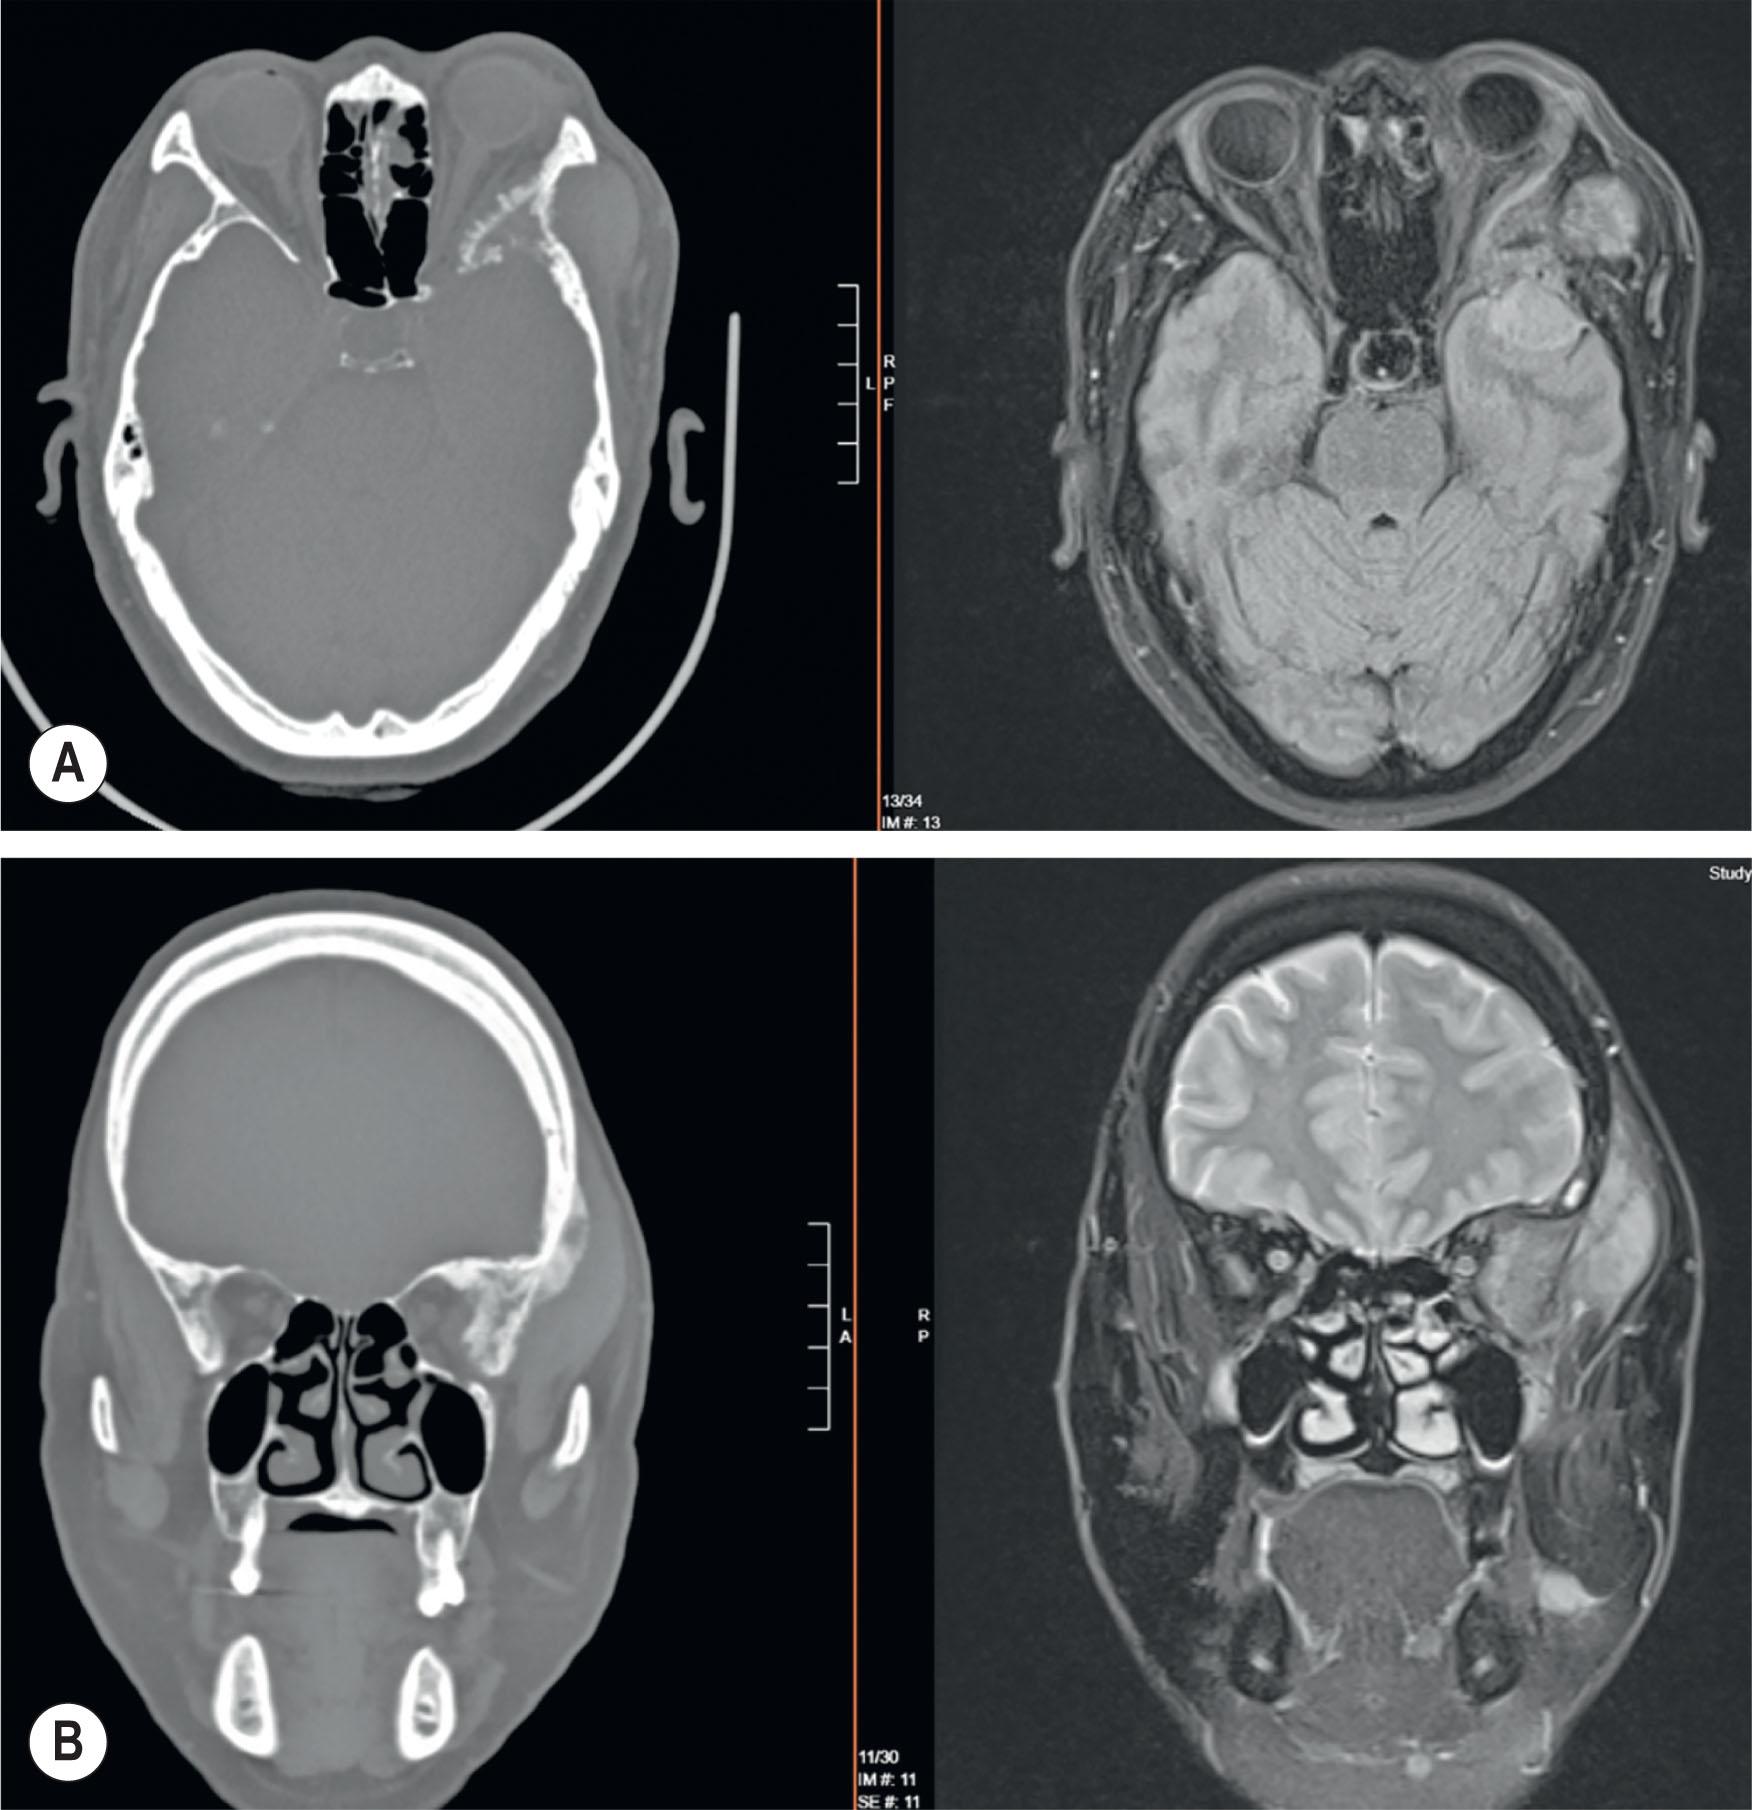 Figure 5.7, Left cranio-orbital meningioma. (A) Axial CT and MRI demonstrated invasion and expansion of the sphenoid in the posterior orbit causing proptosis. (B) Coronal MRI image demonstrated expansion of tumor well beyond bone, invading soft tissues within the orbit as well as temporal fossa.